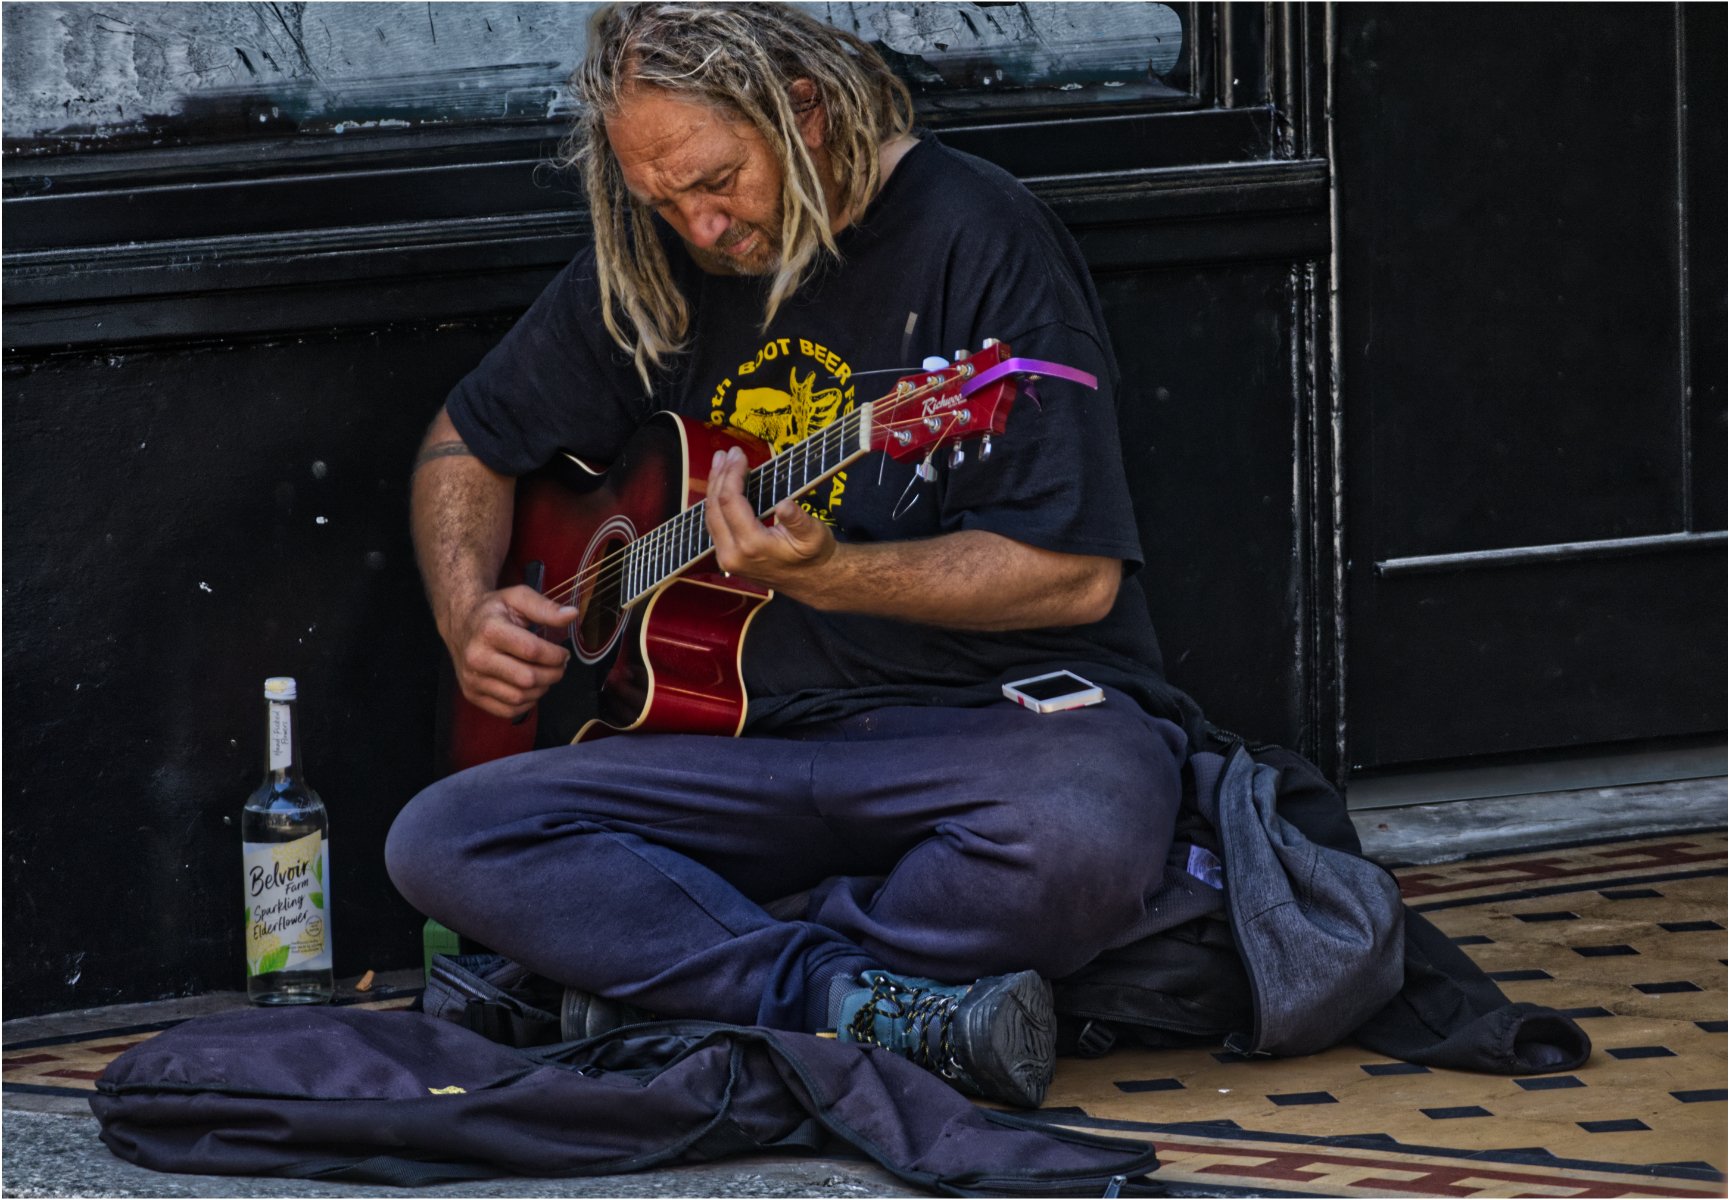 Street Entertainer by Colin Pascoe